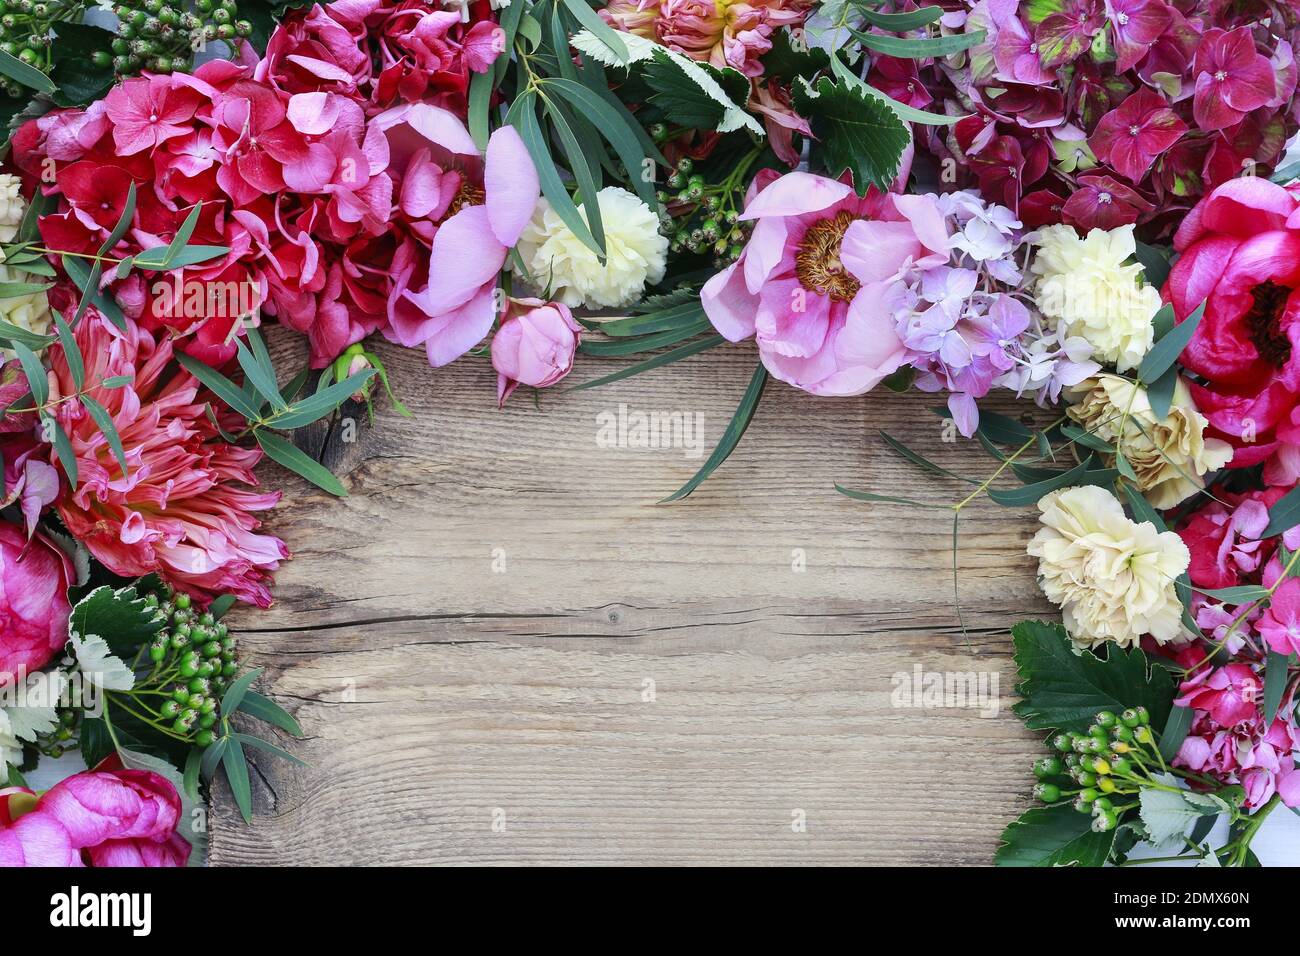 Florist's workspace - flowers and accessories on wooden background. Copy space. Stock Photo